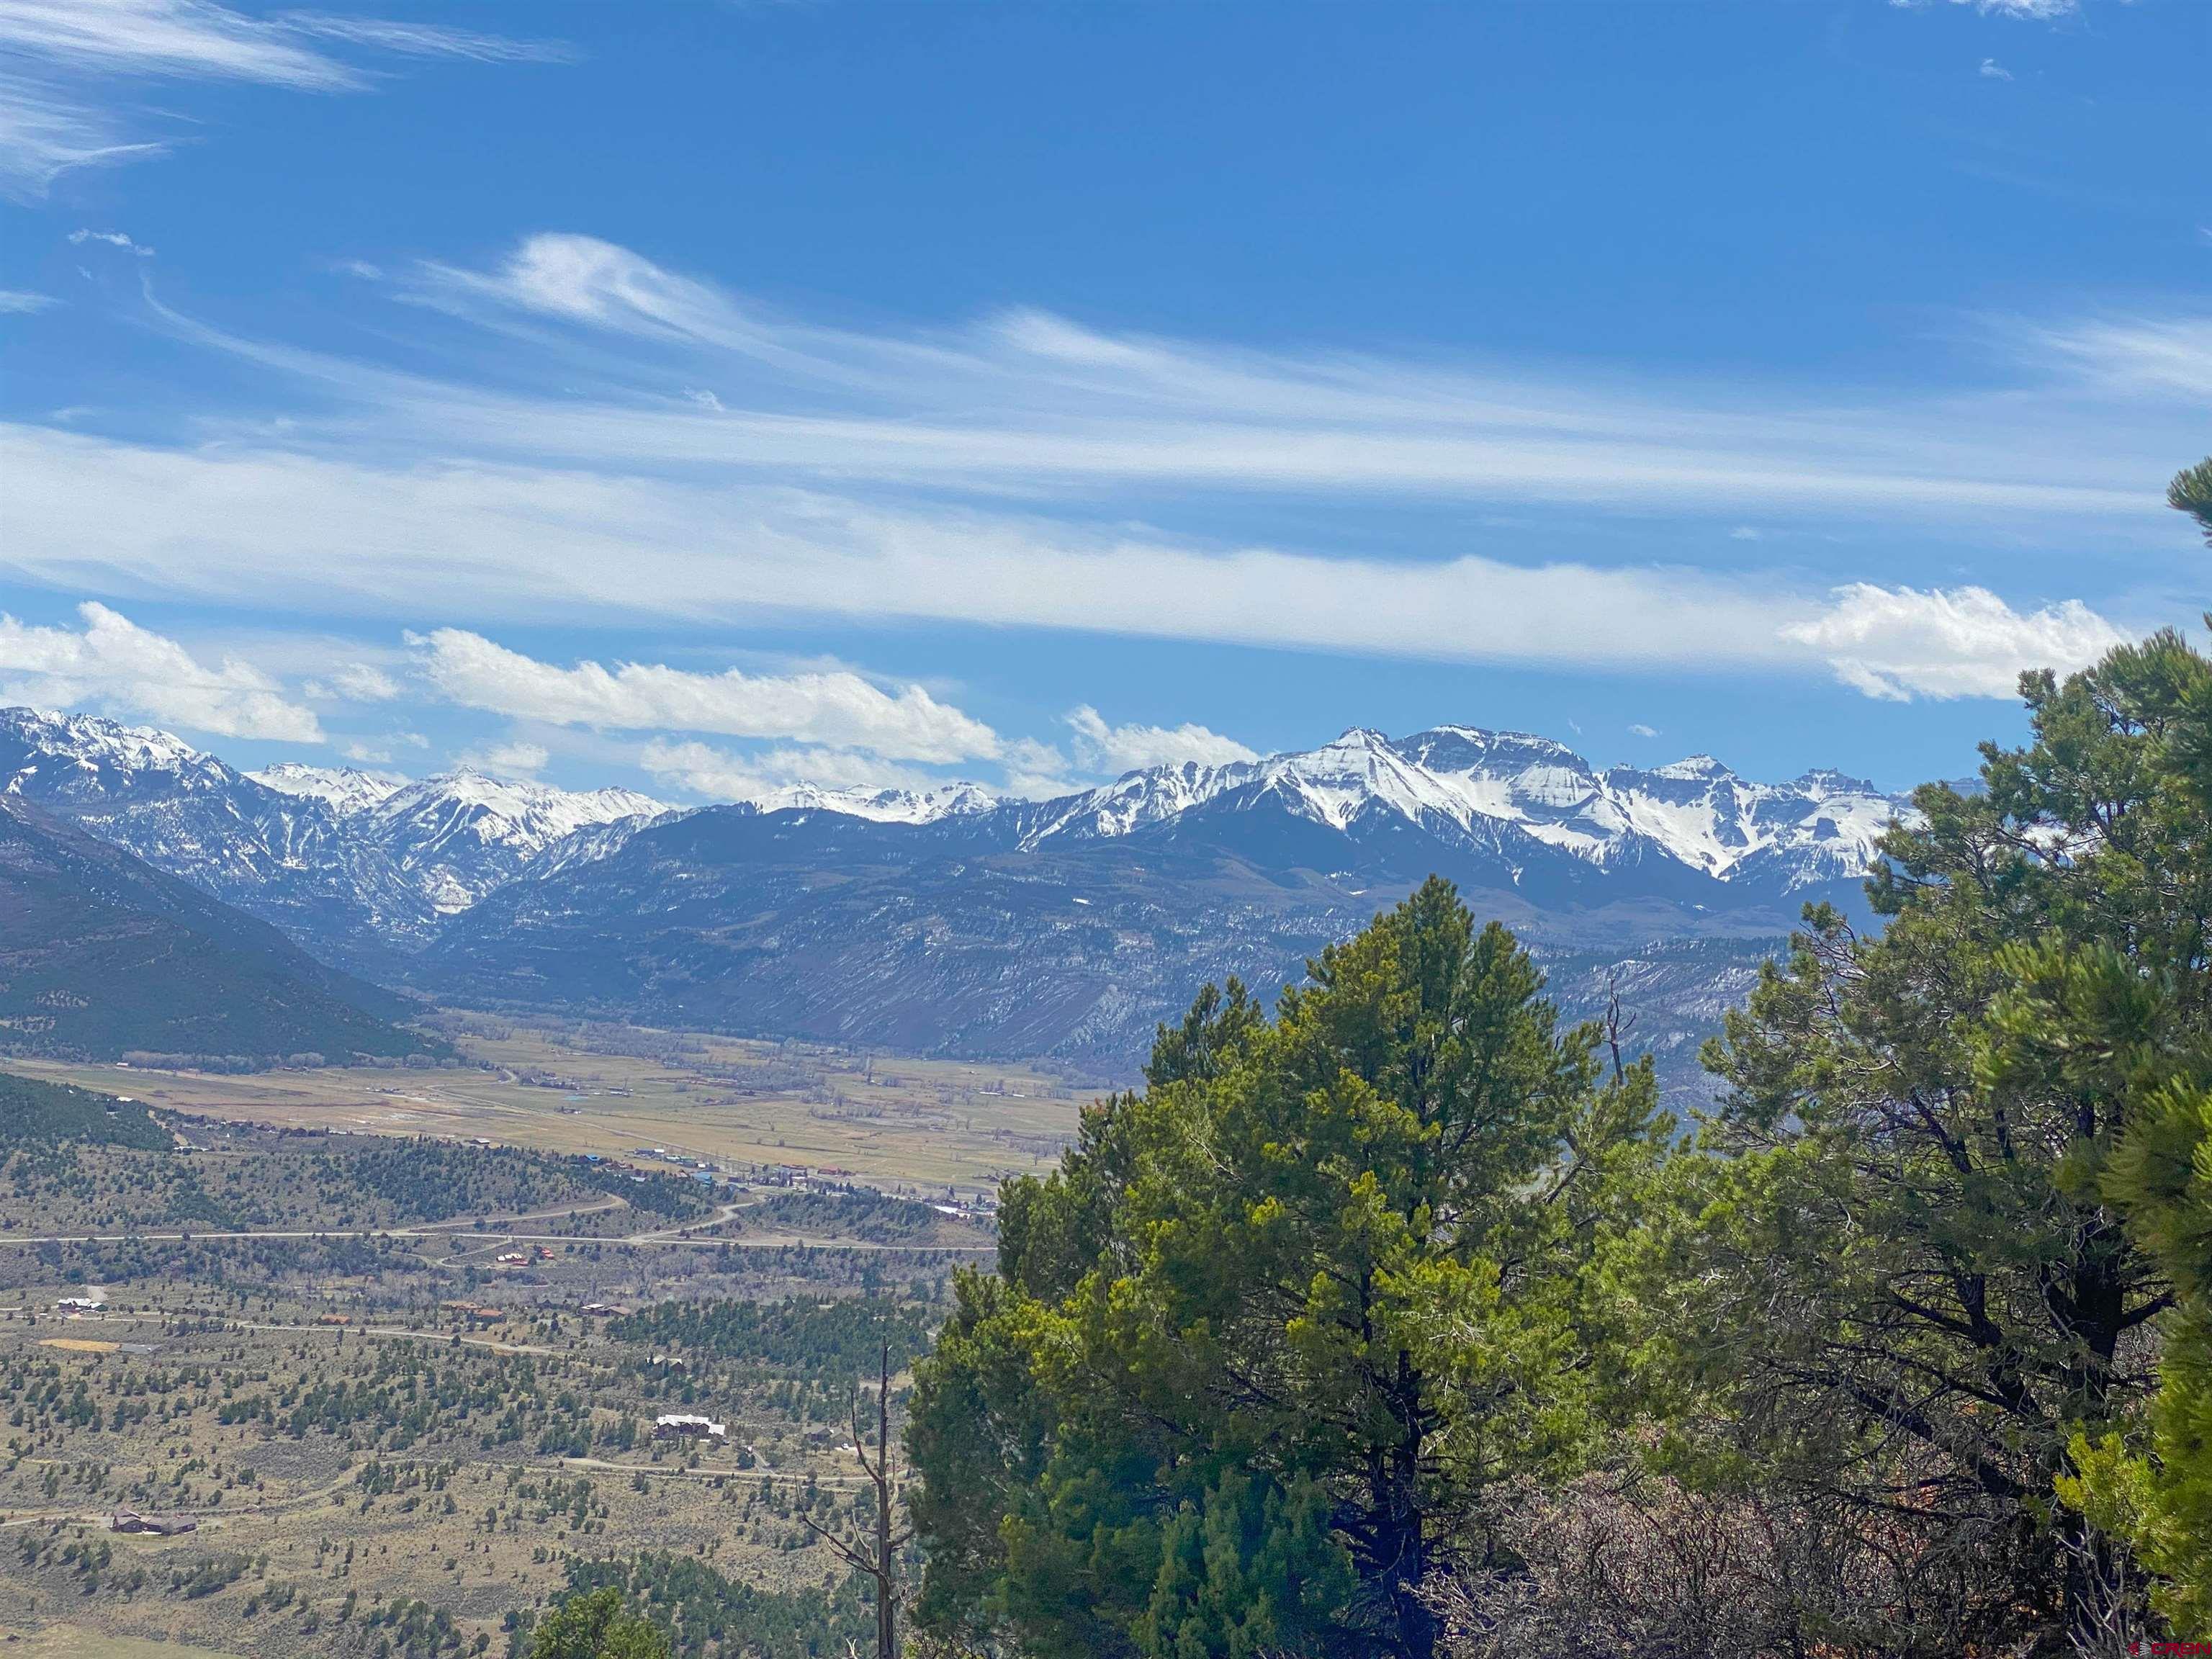 Log Hill Mesa Escarpment lot overlooking the Ridgway and Ouray Valley. With unhindered sweeping views of the Cimarron Range all the way to the Sneffels range. This nearly 3 acre parcel is ready for your dream home surrounded by Log Hill Village trail system and backing sitting on the Escarpment. The lot includes a paid Dallas Creek Water Tap, and all utilities to the lot line including Fiber Network.